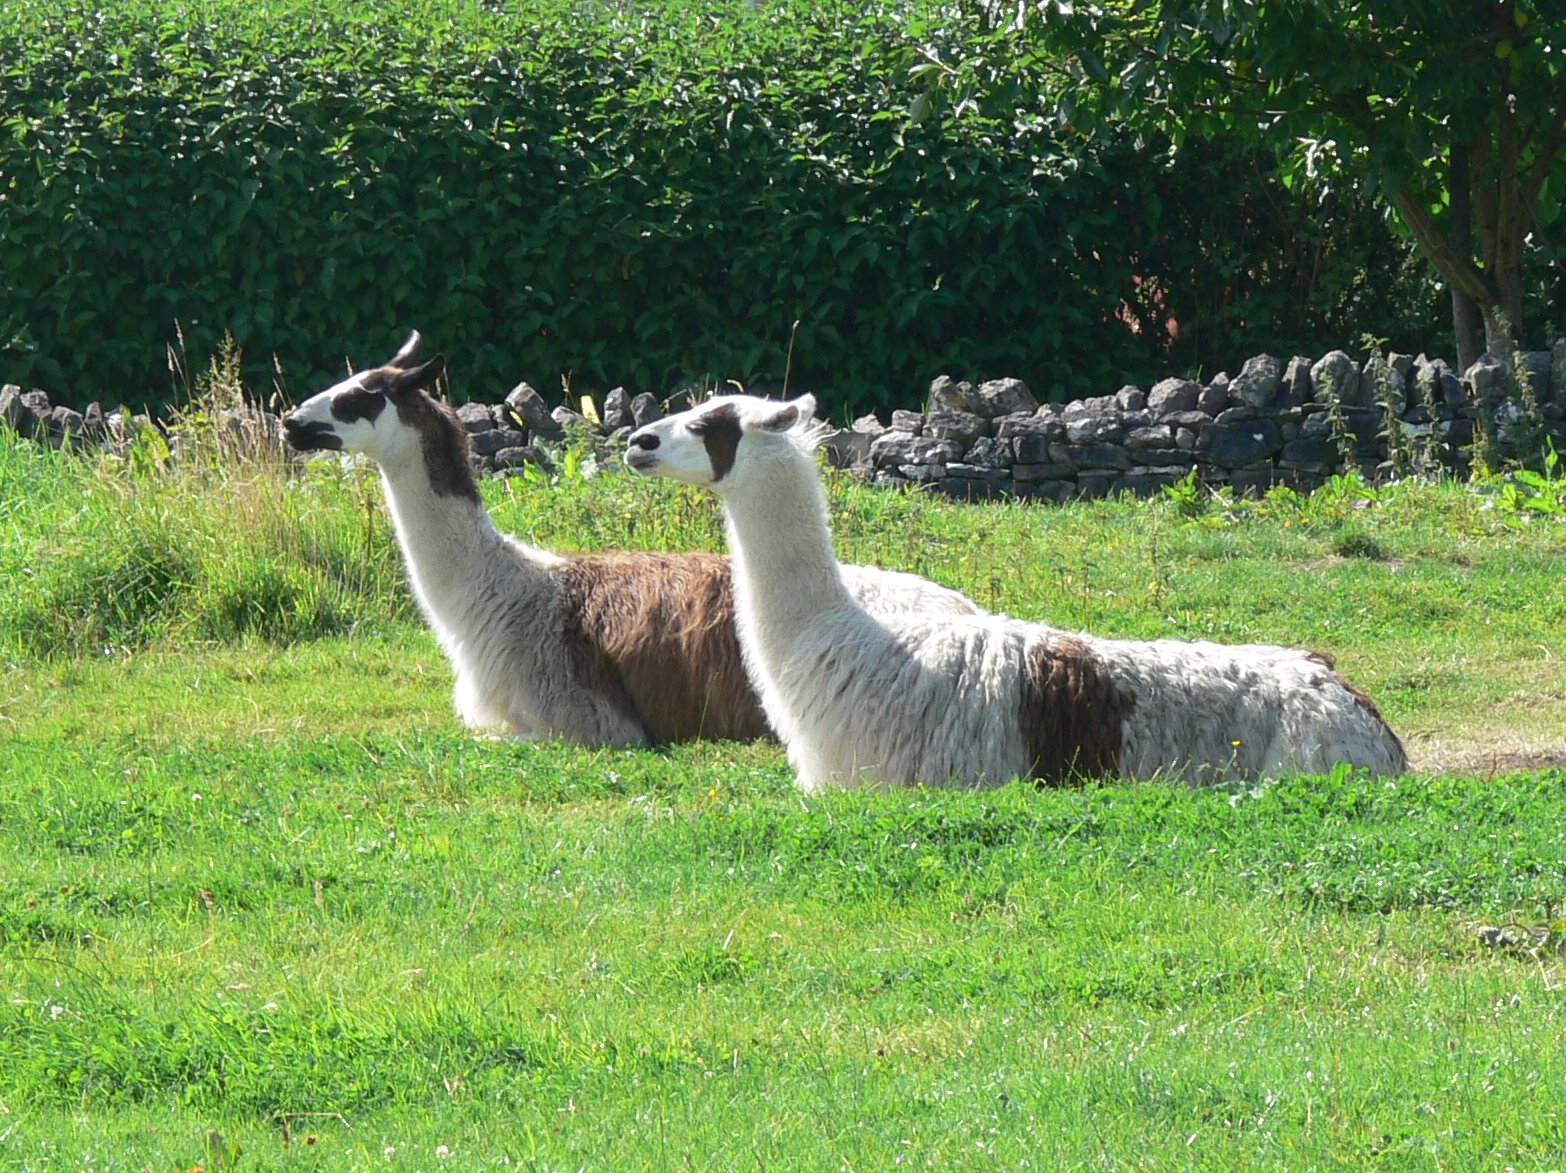 two llamas are resting in the green grass